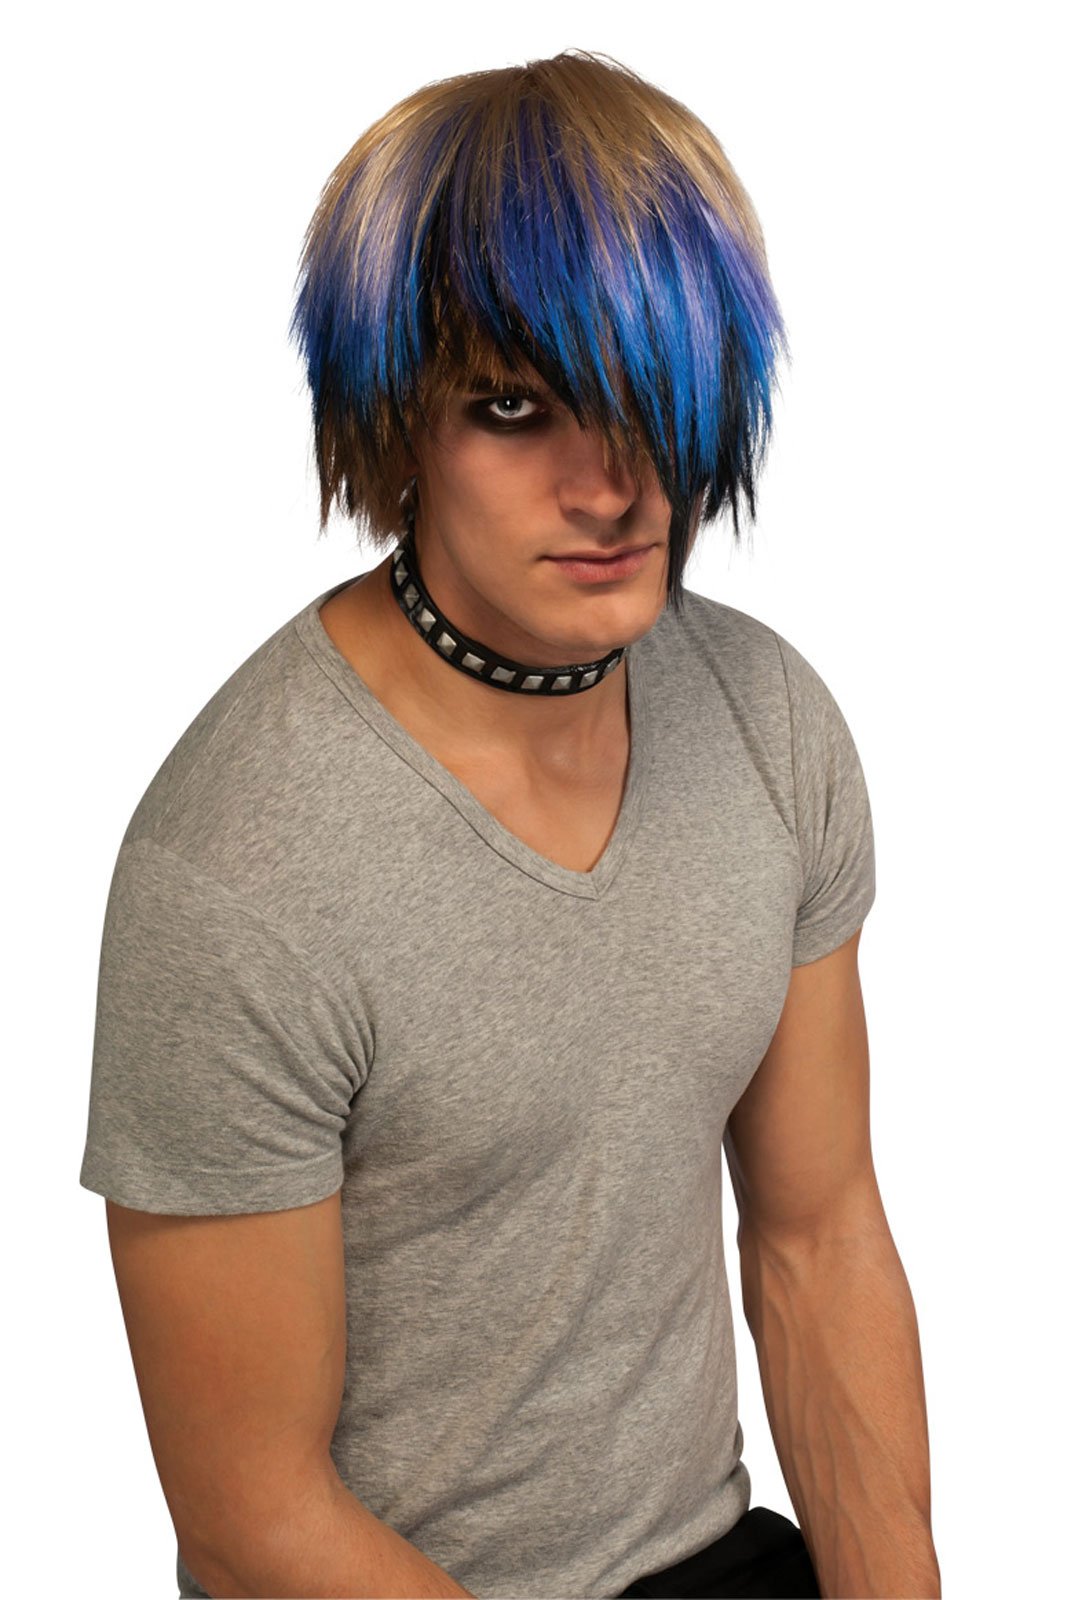 Male Pixie Adult Wig - Click Image to Close